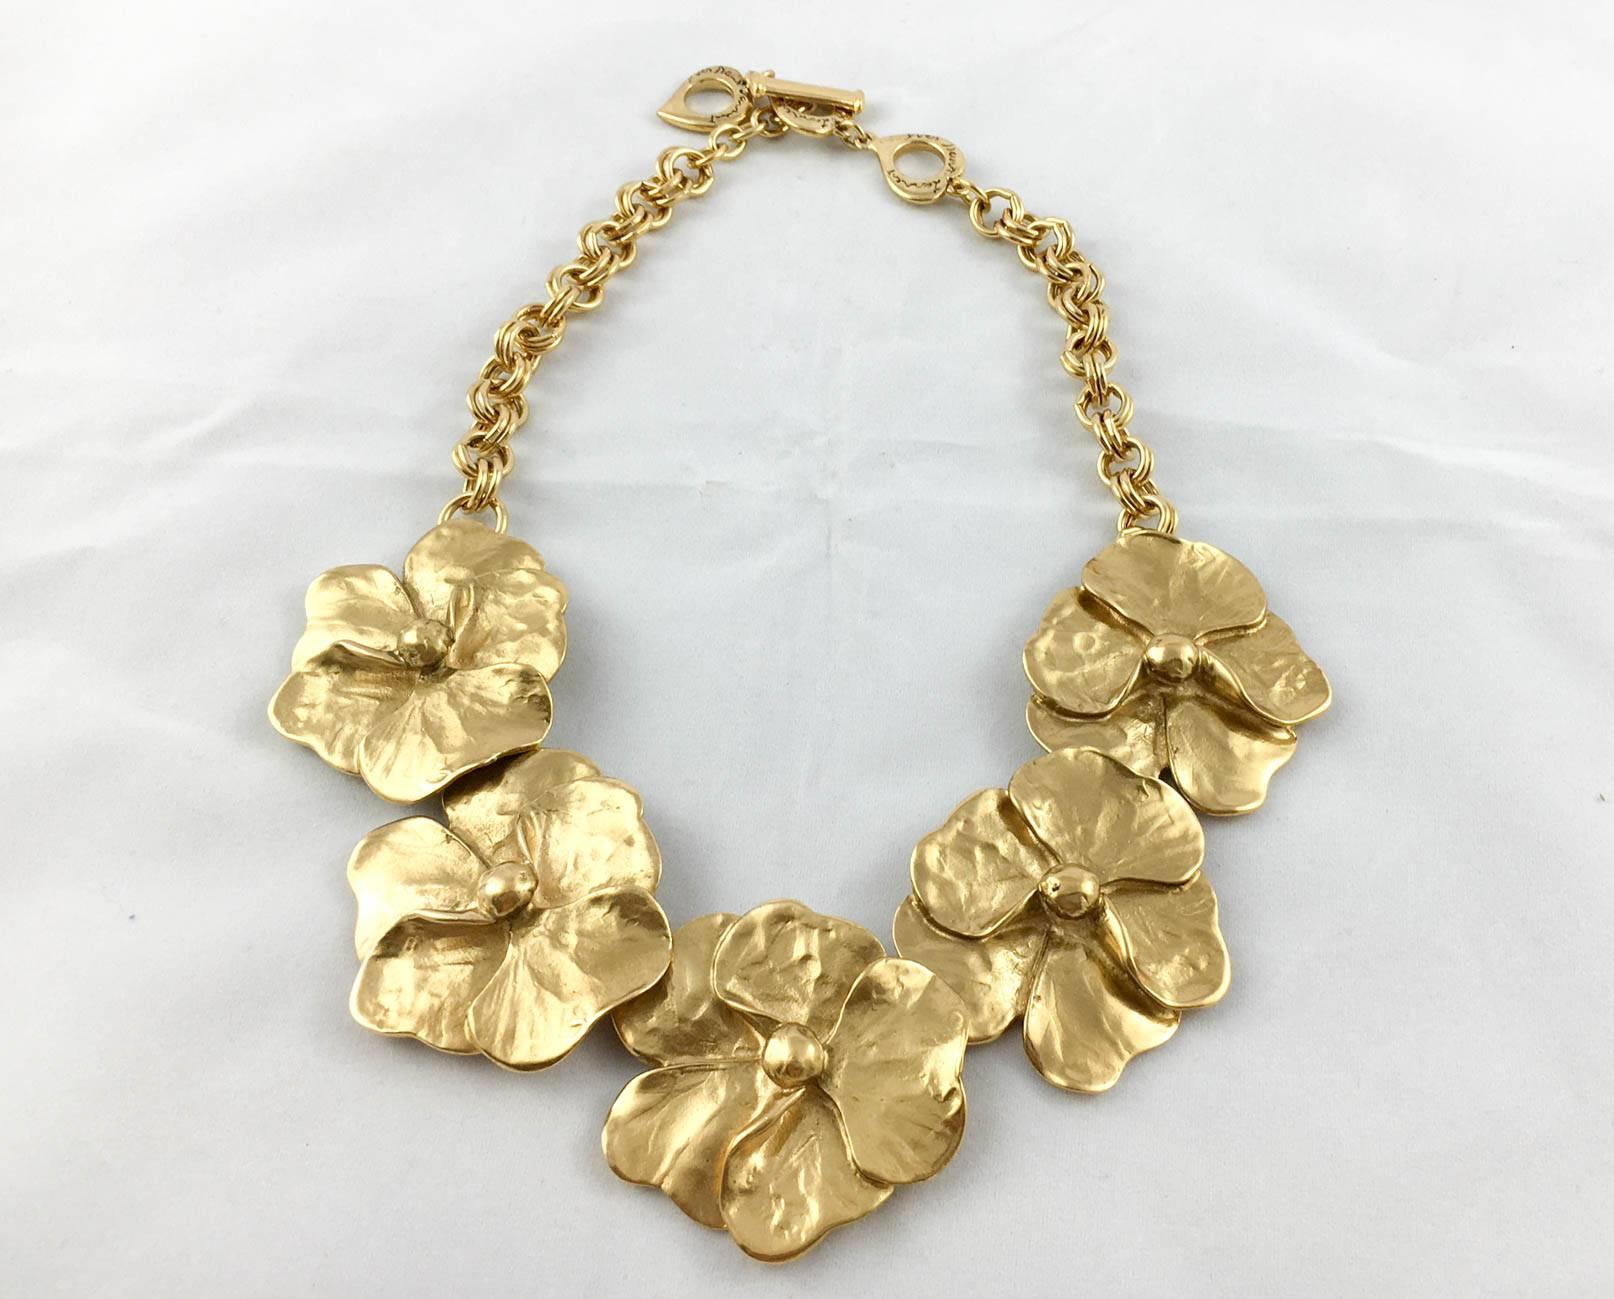 Rare Vintage Yves Saint Laurent Gold-Plated Set. Beautiful Yves Saint Laurent set by Robert Goossens comprising of a necklace, a pair of clip-on earrings and a pendant/brooch. The floral motif is gorgeous and a perfect example of the long and